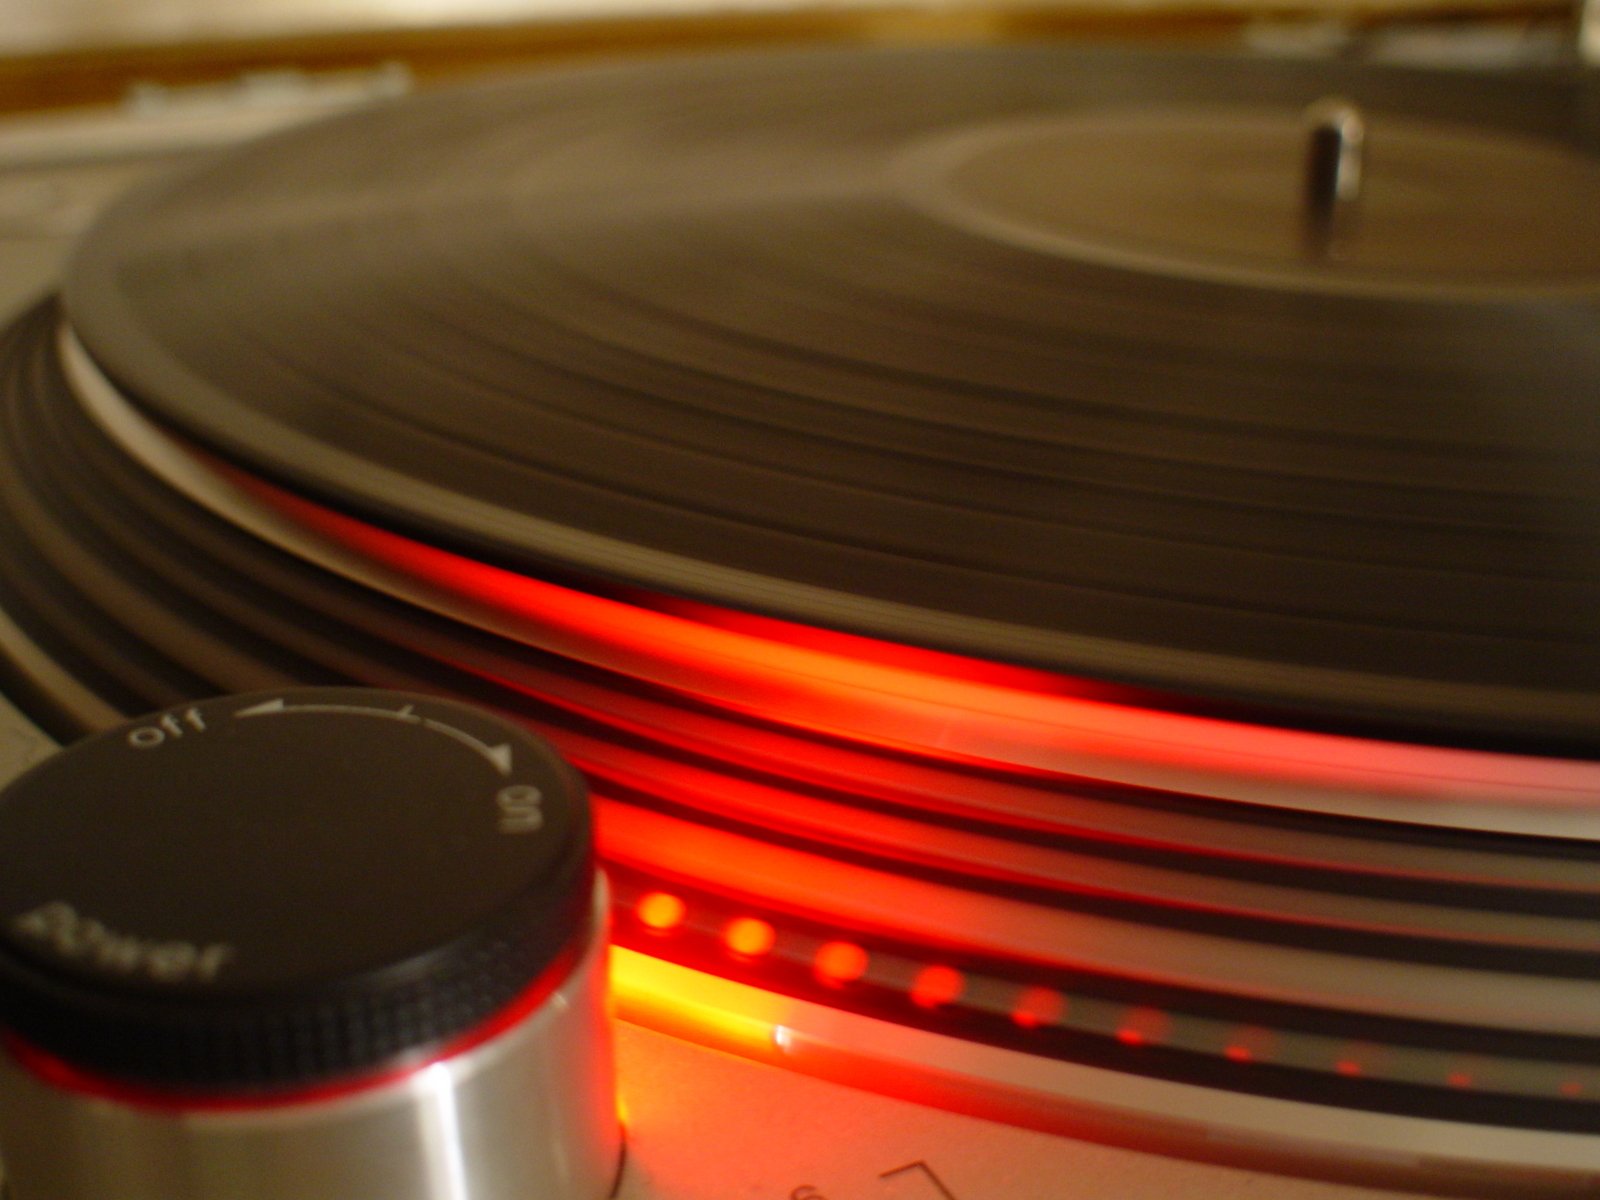 turntable with light - up plate and red colored lights